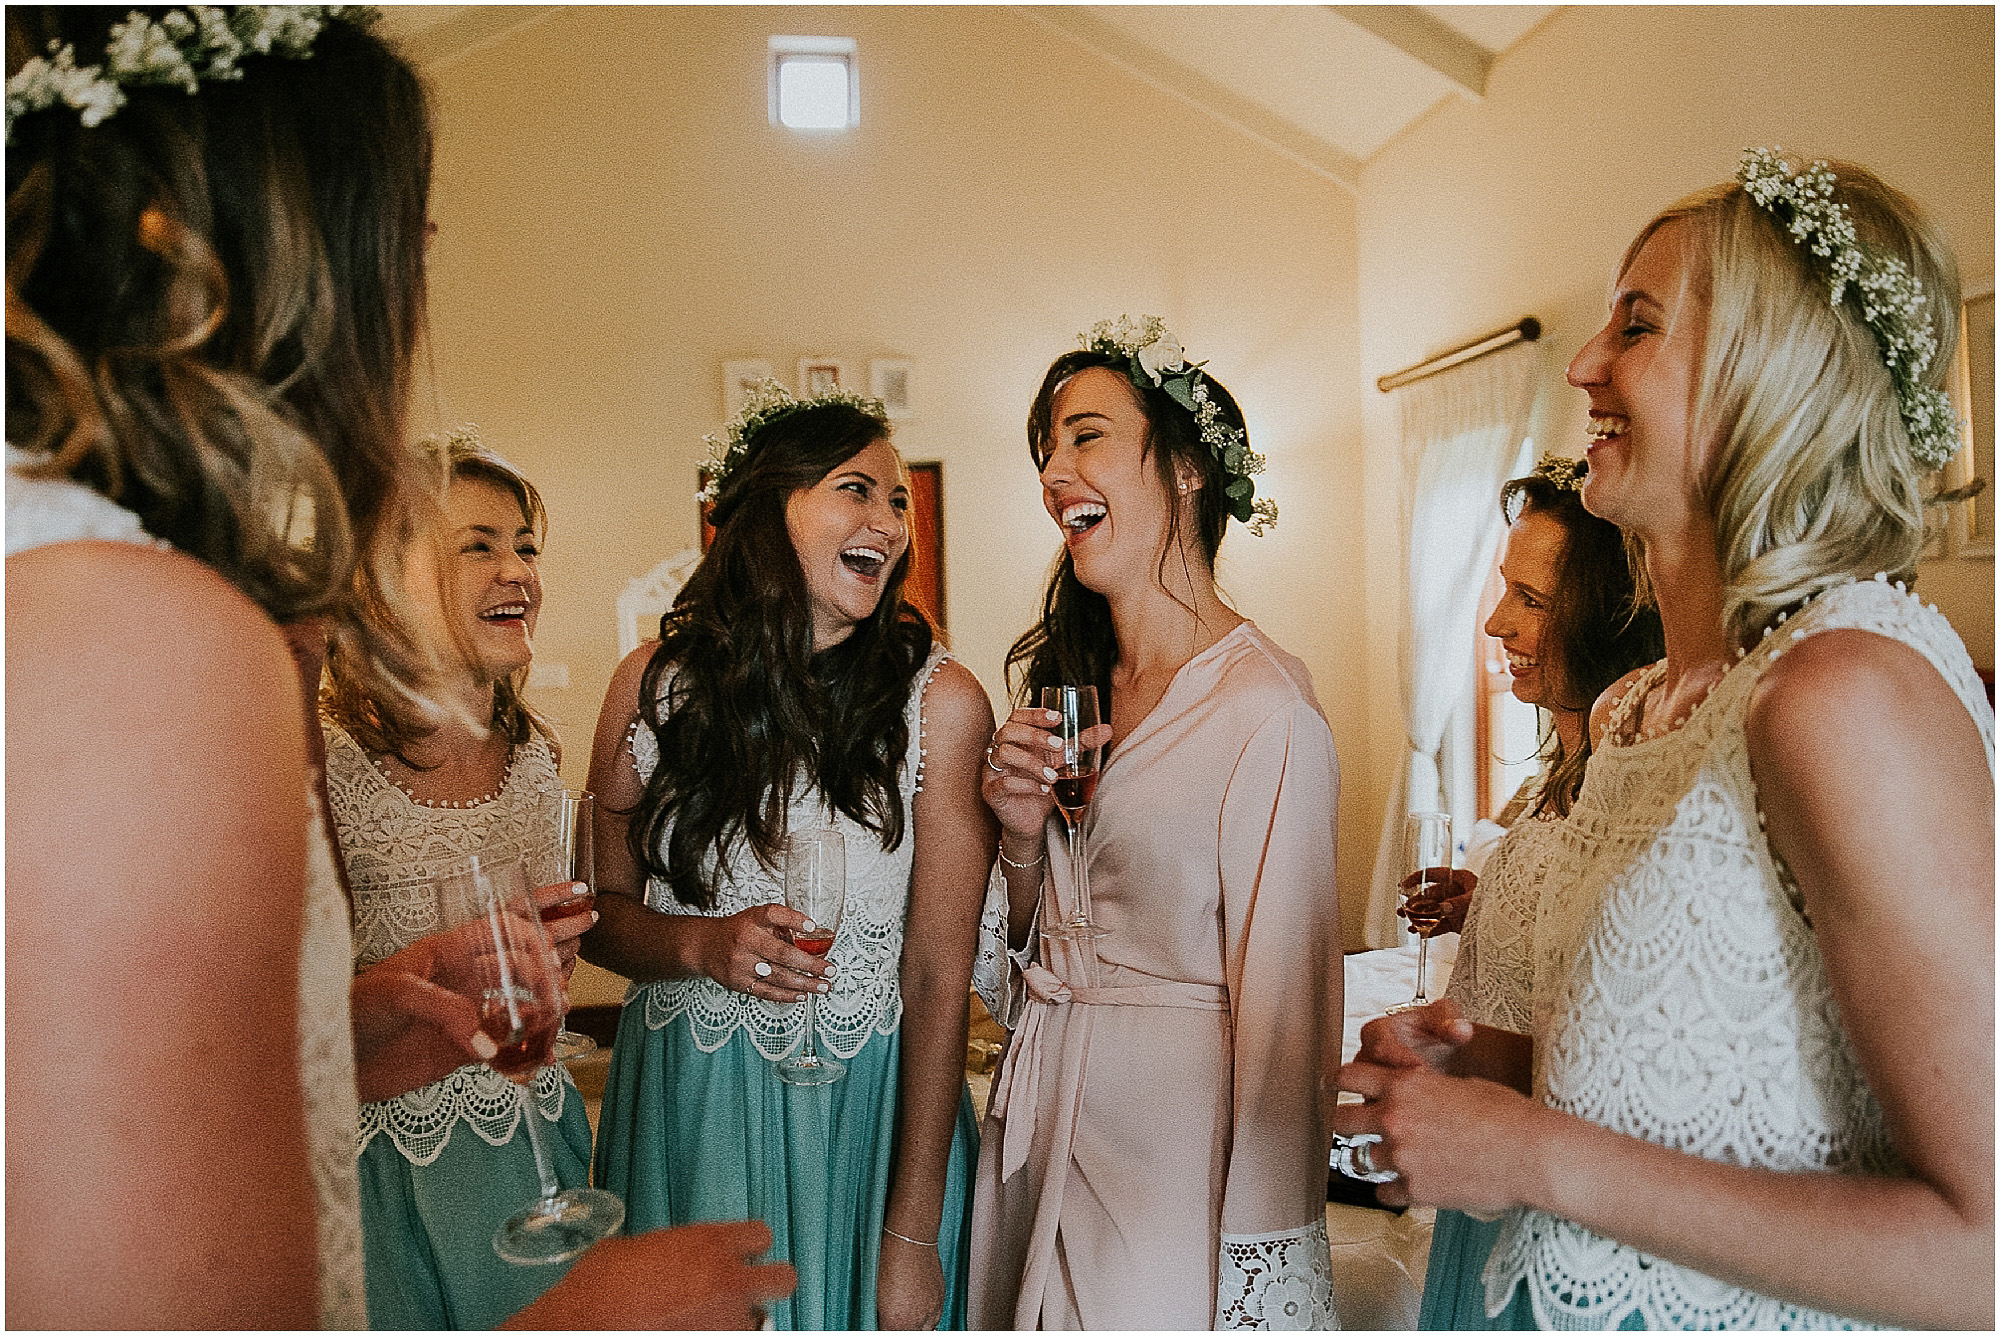 Outdoor-Forest-Destination-Wedding-Photographer-Maryke-Albertyn-Photography-Looks-Like-Film-Authentic-Alternative-Cape-Town-Pretoria-Silver-Sixpence-Dullstroom-Bridesmaids-Flower-Crown